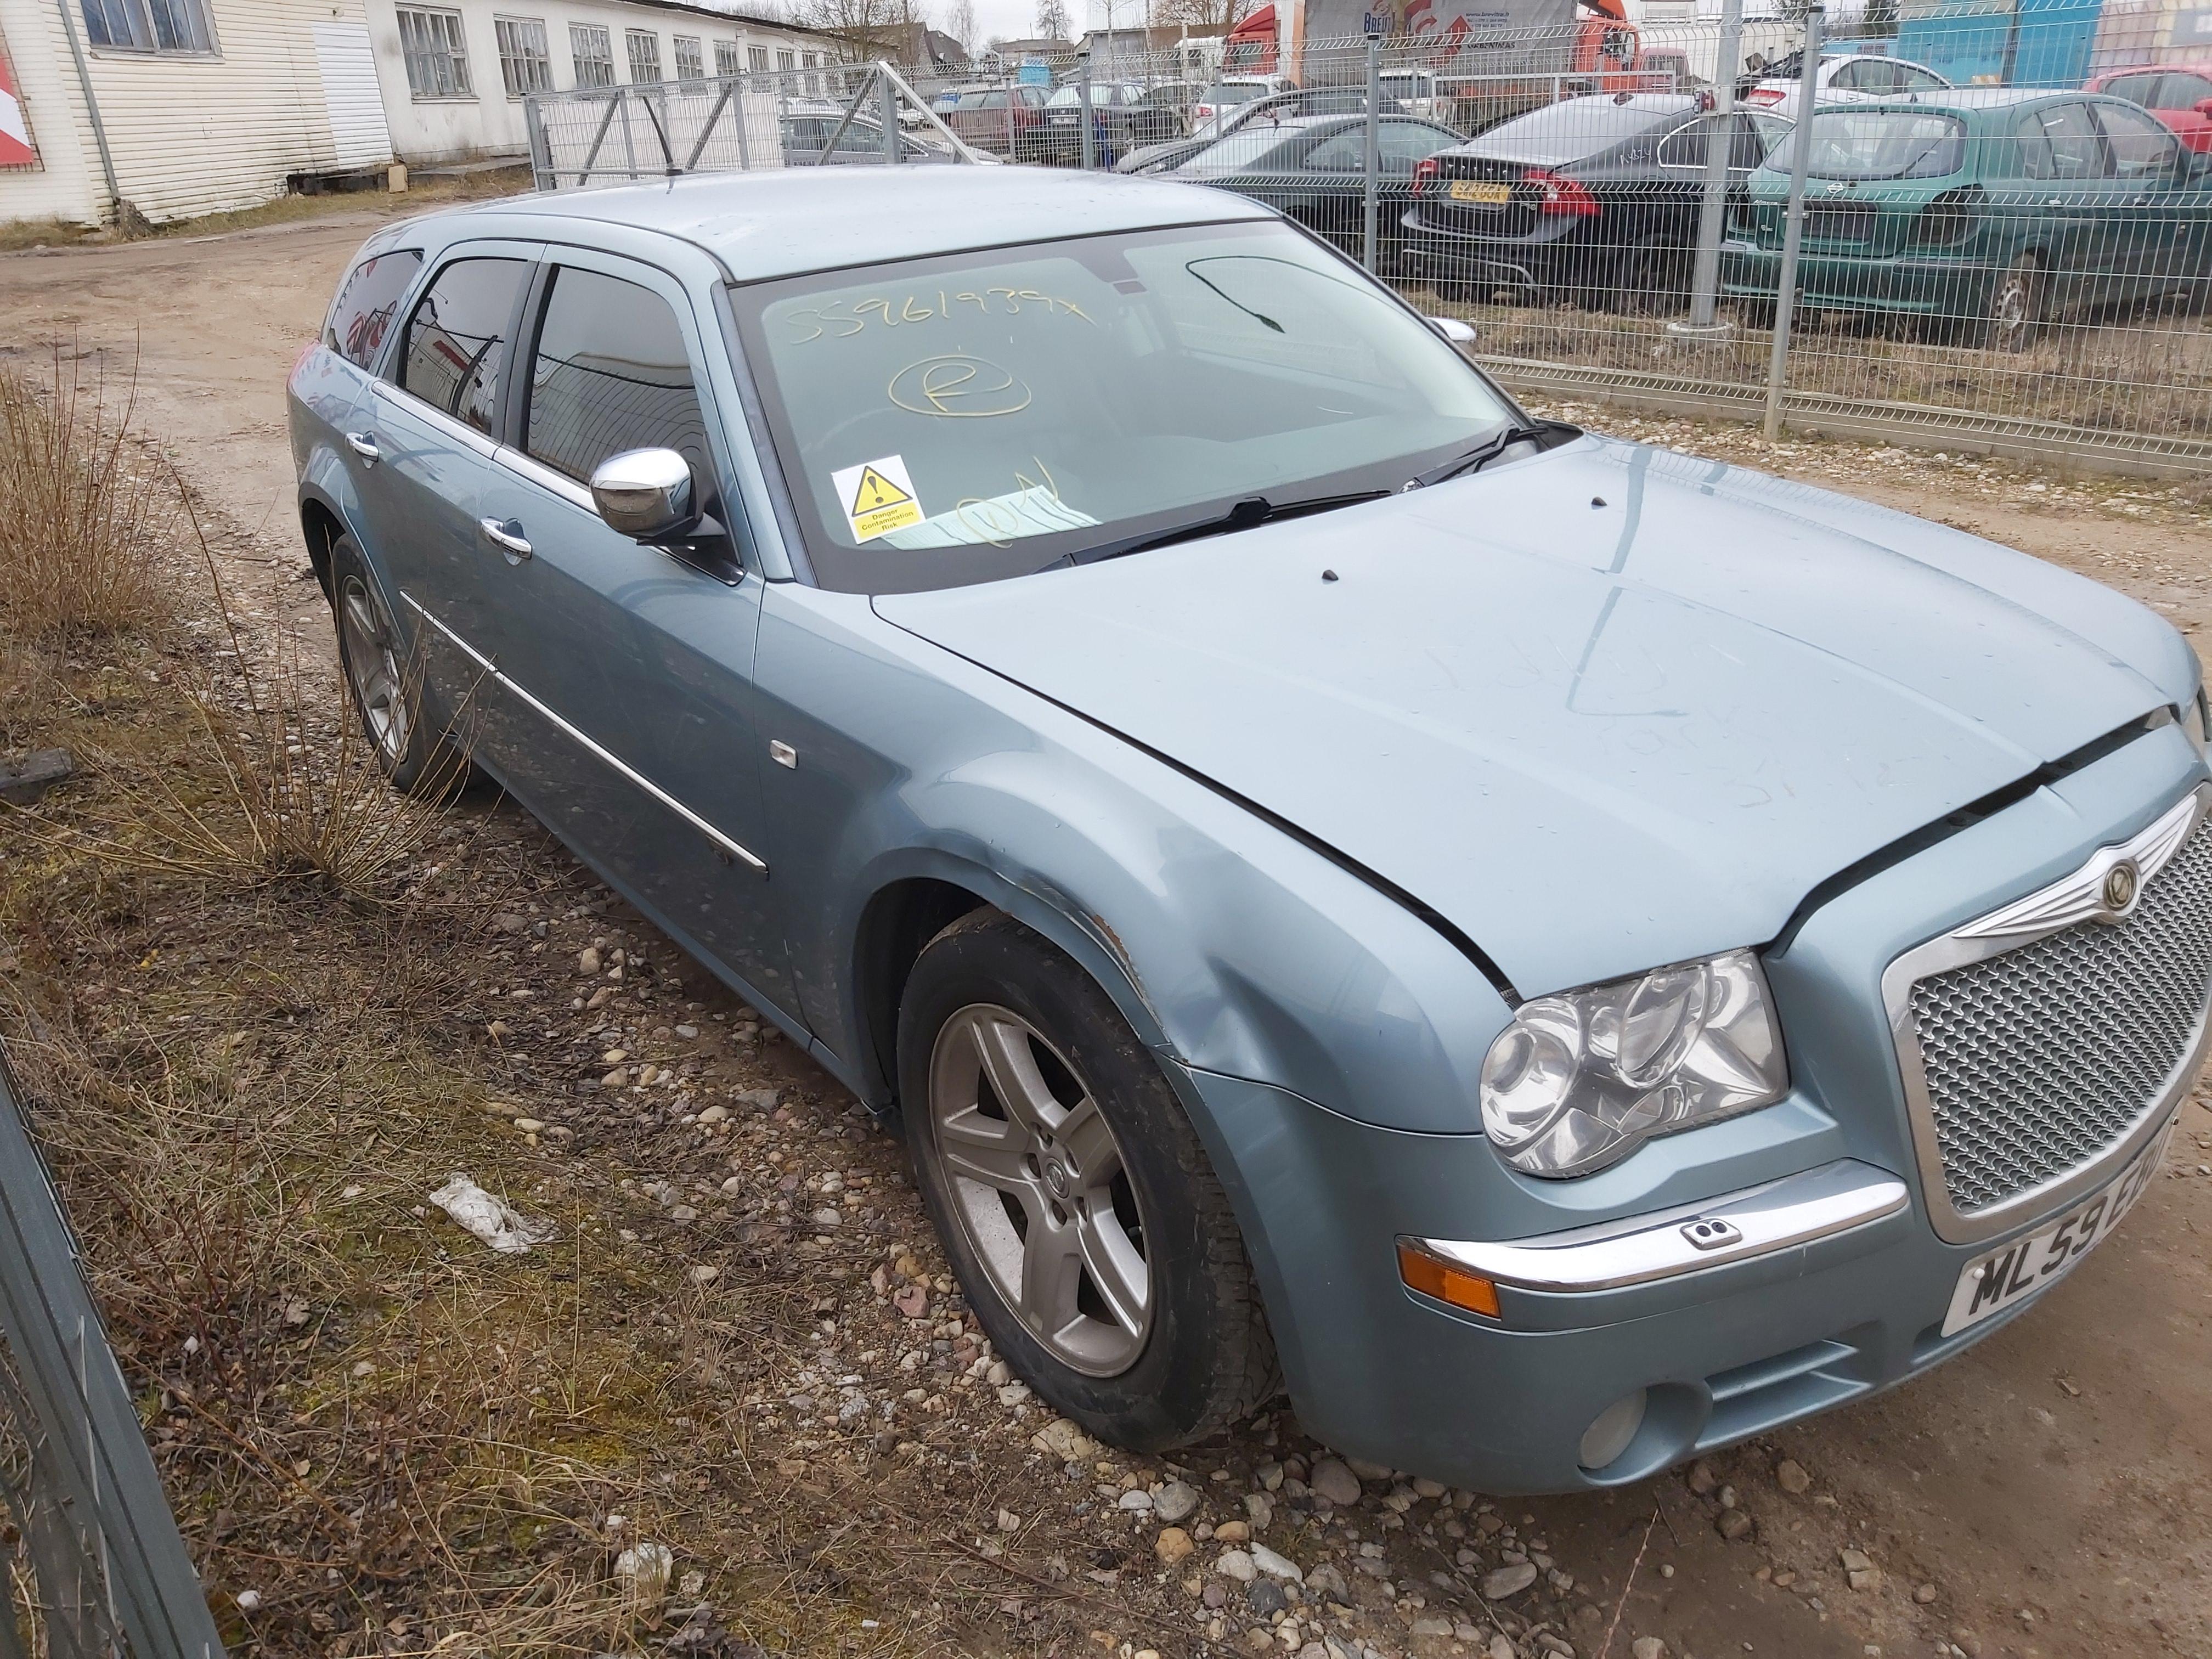 A5148 Chrysler 300C 2009 3.0 Automatic Diesel